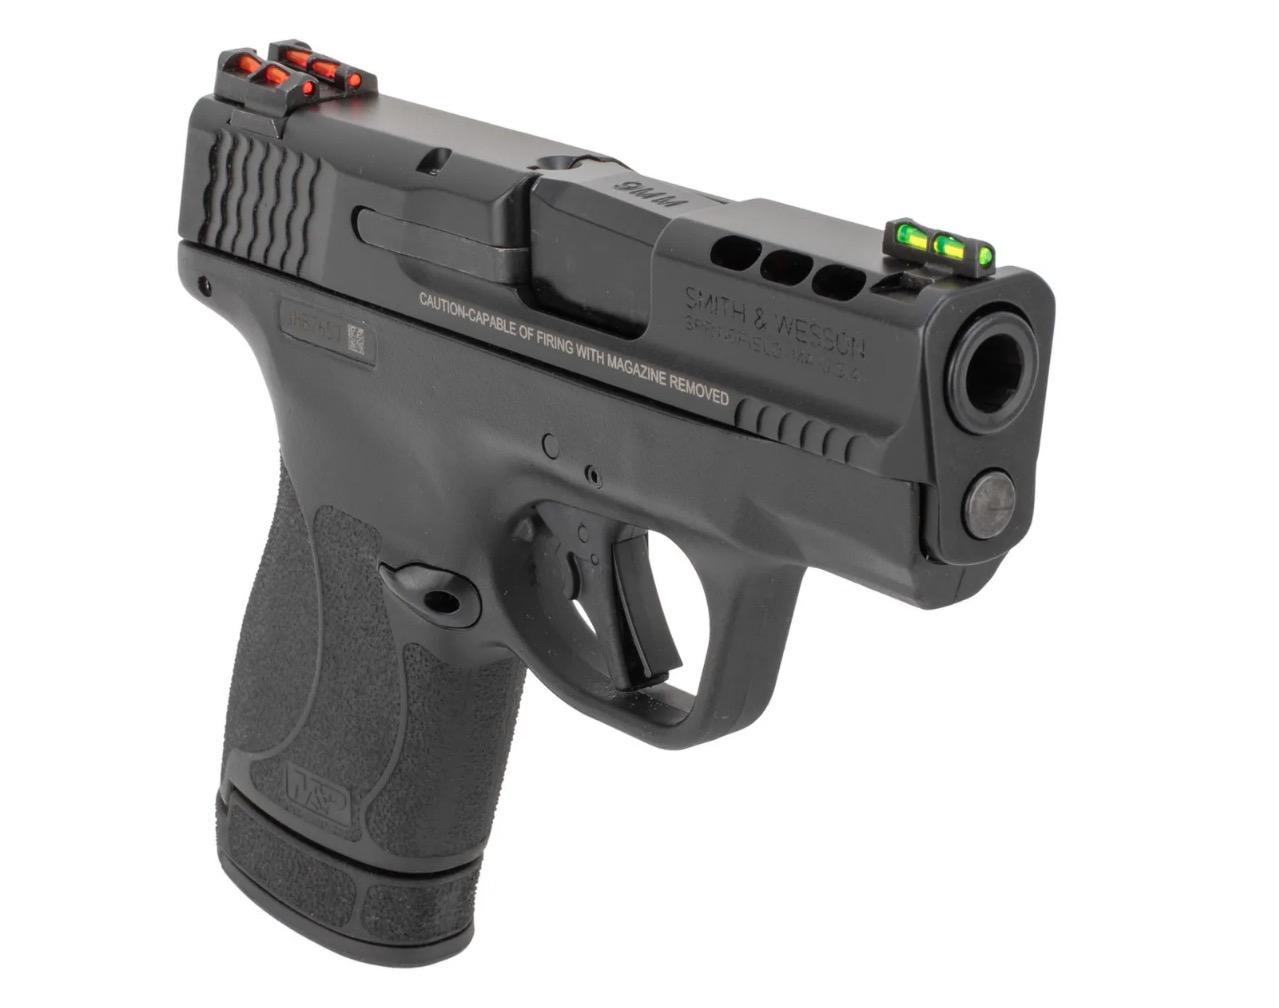 Smith & Wesson M&P Shield Plus PC 9mm Micro Compact Thumb Safety Ported 13 Round 3.1" - $599.99 